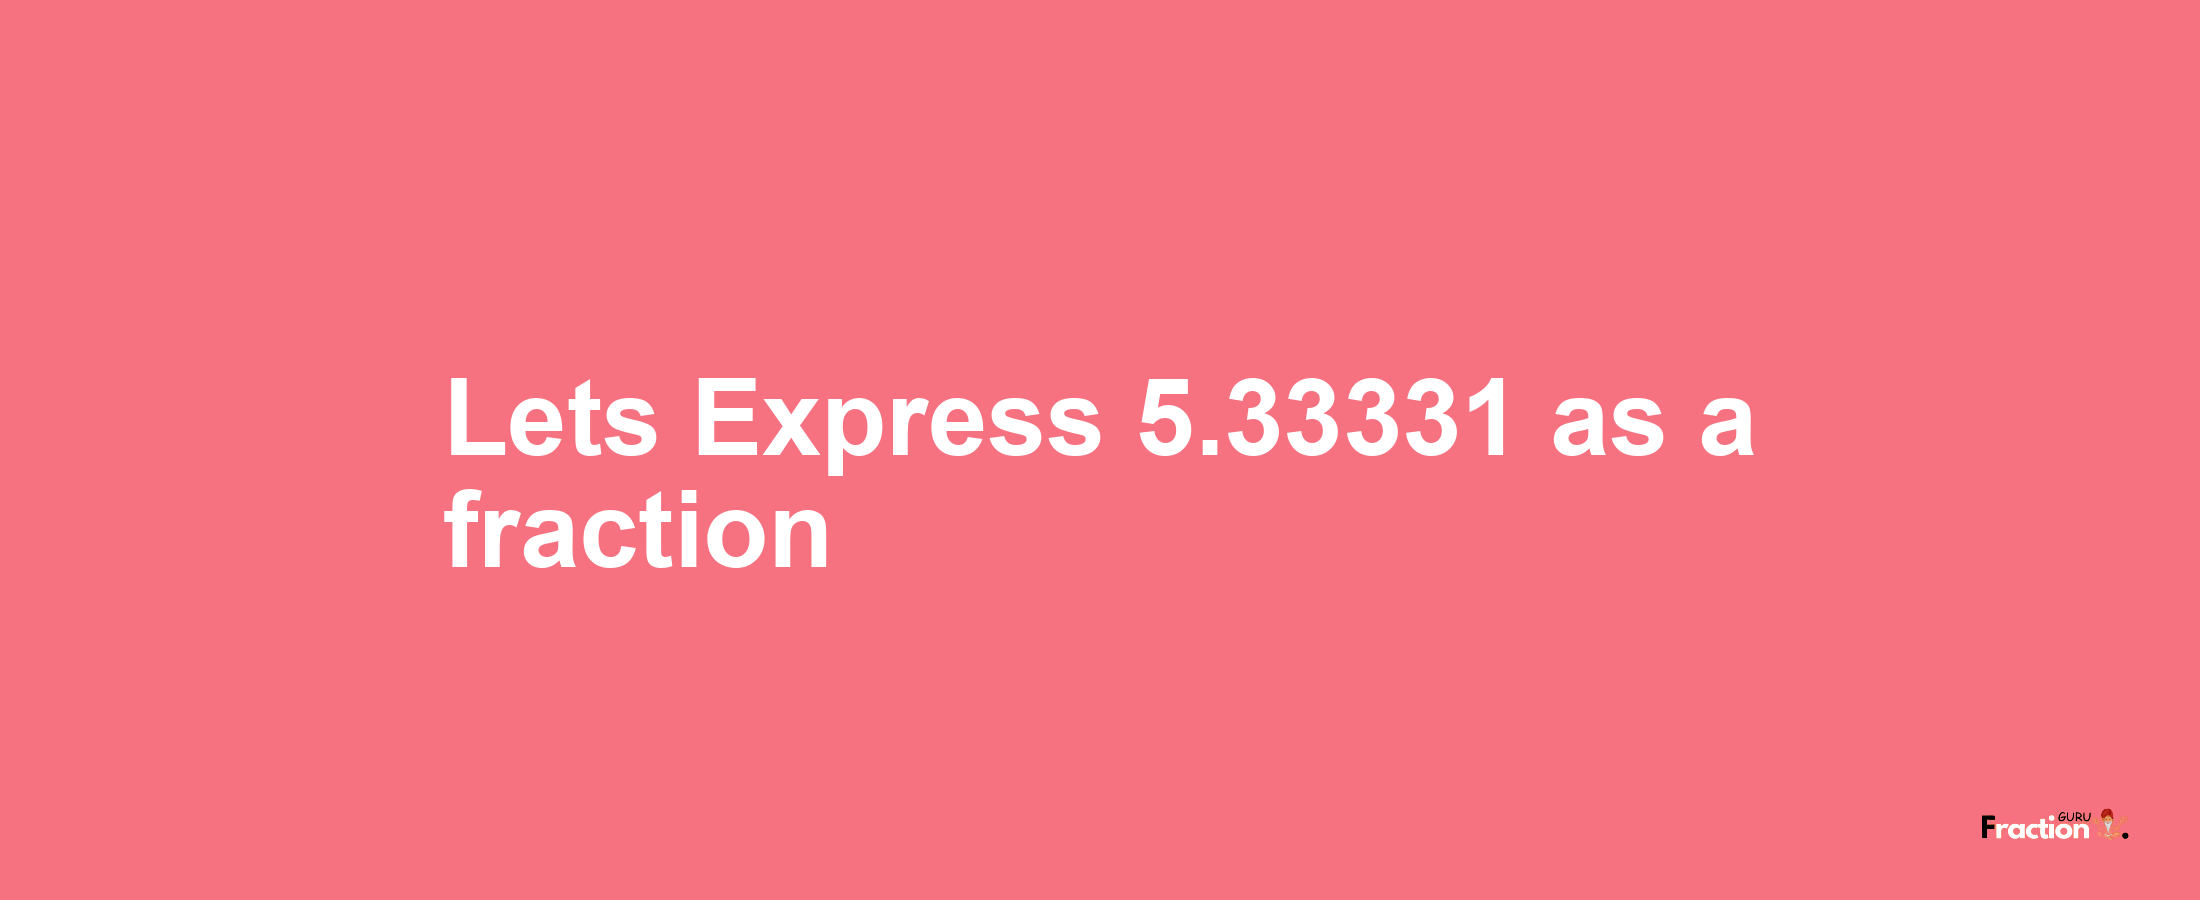 Lets Express 5.33331 as afraction